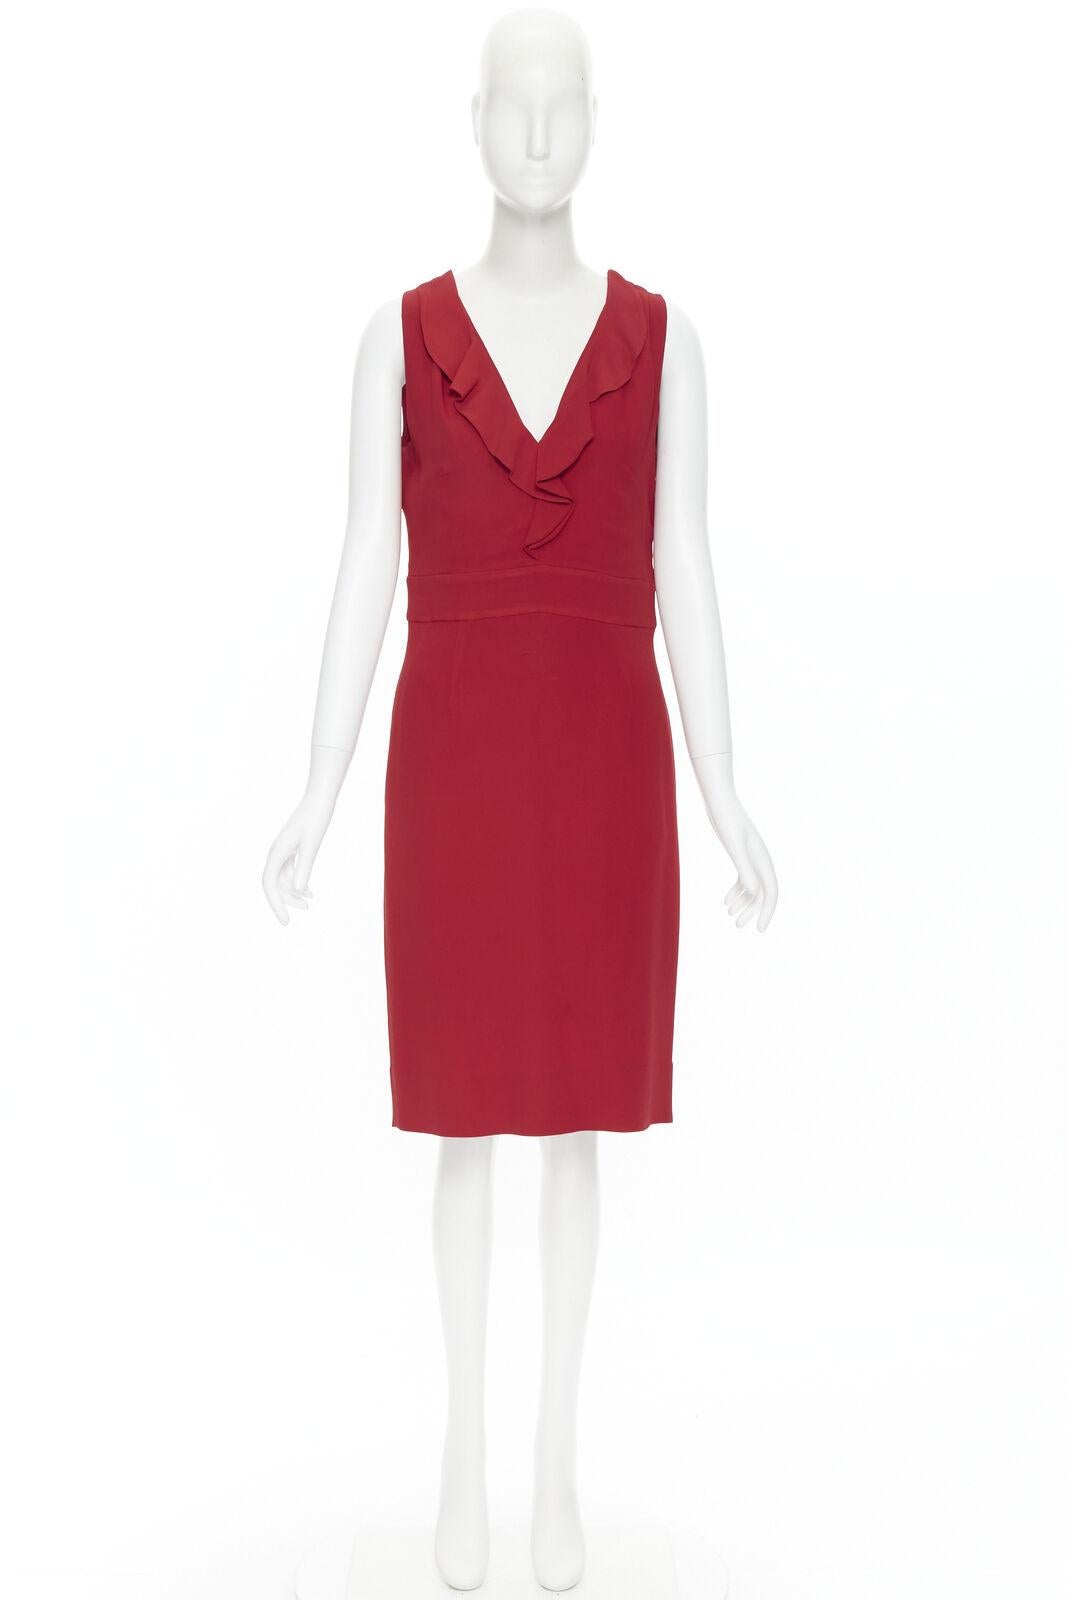 VALENTINO red crepe ruffle plunge neck sheath cocktail dress IT42 M For Sale 7